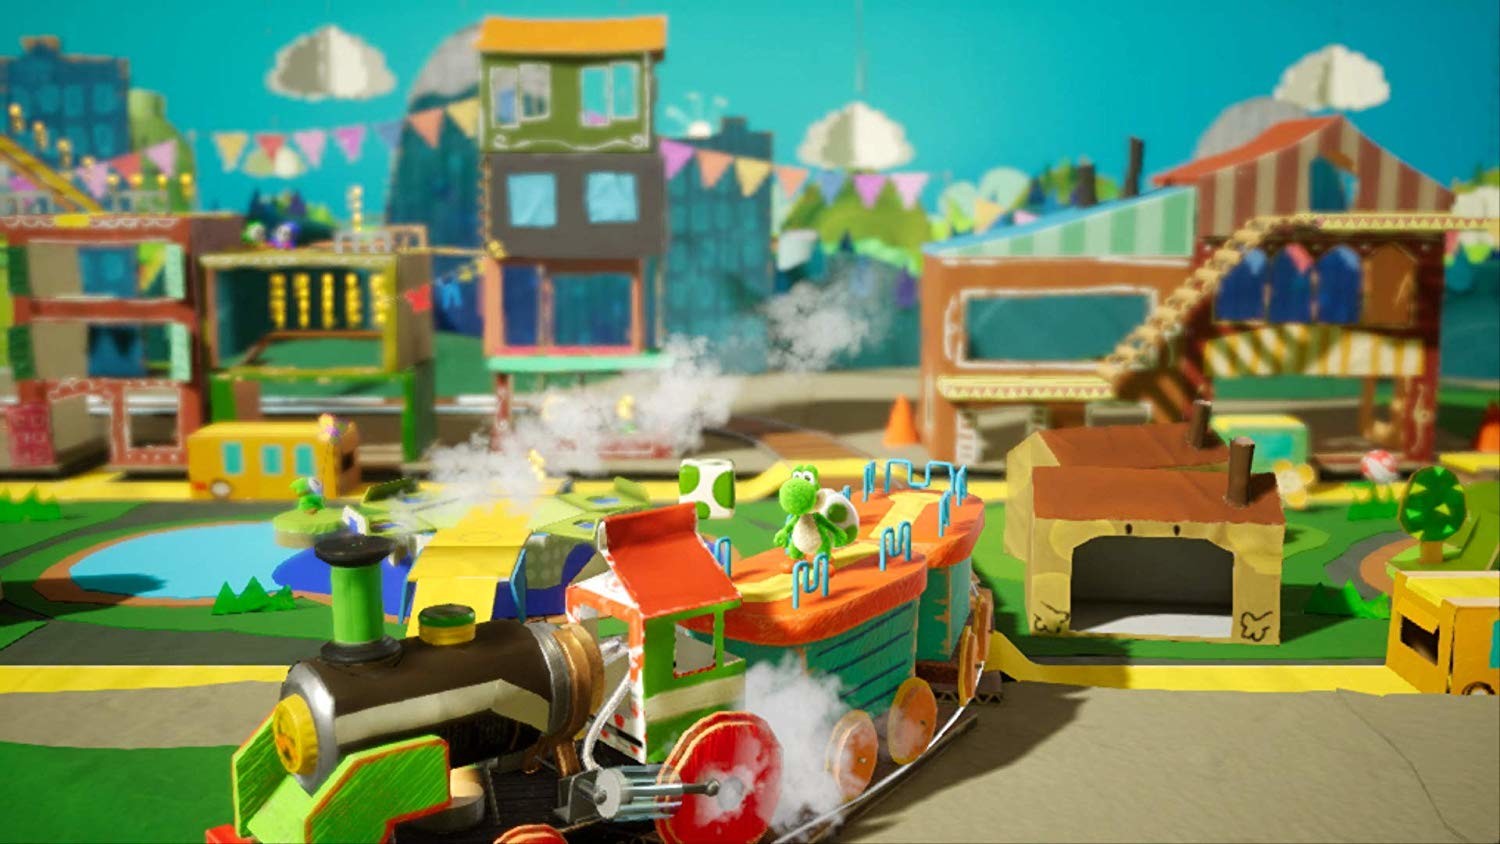 Yoshi’s Crafted World’s dev team discusses where they came up with the flip-side mechanic